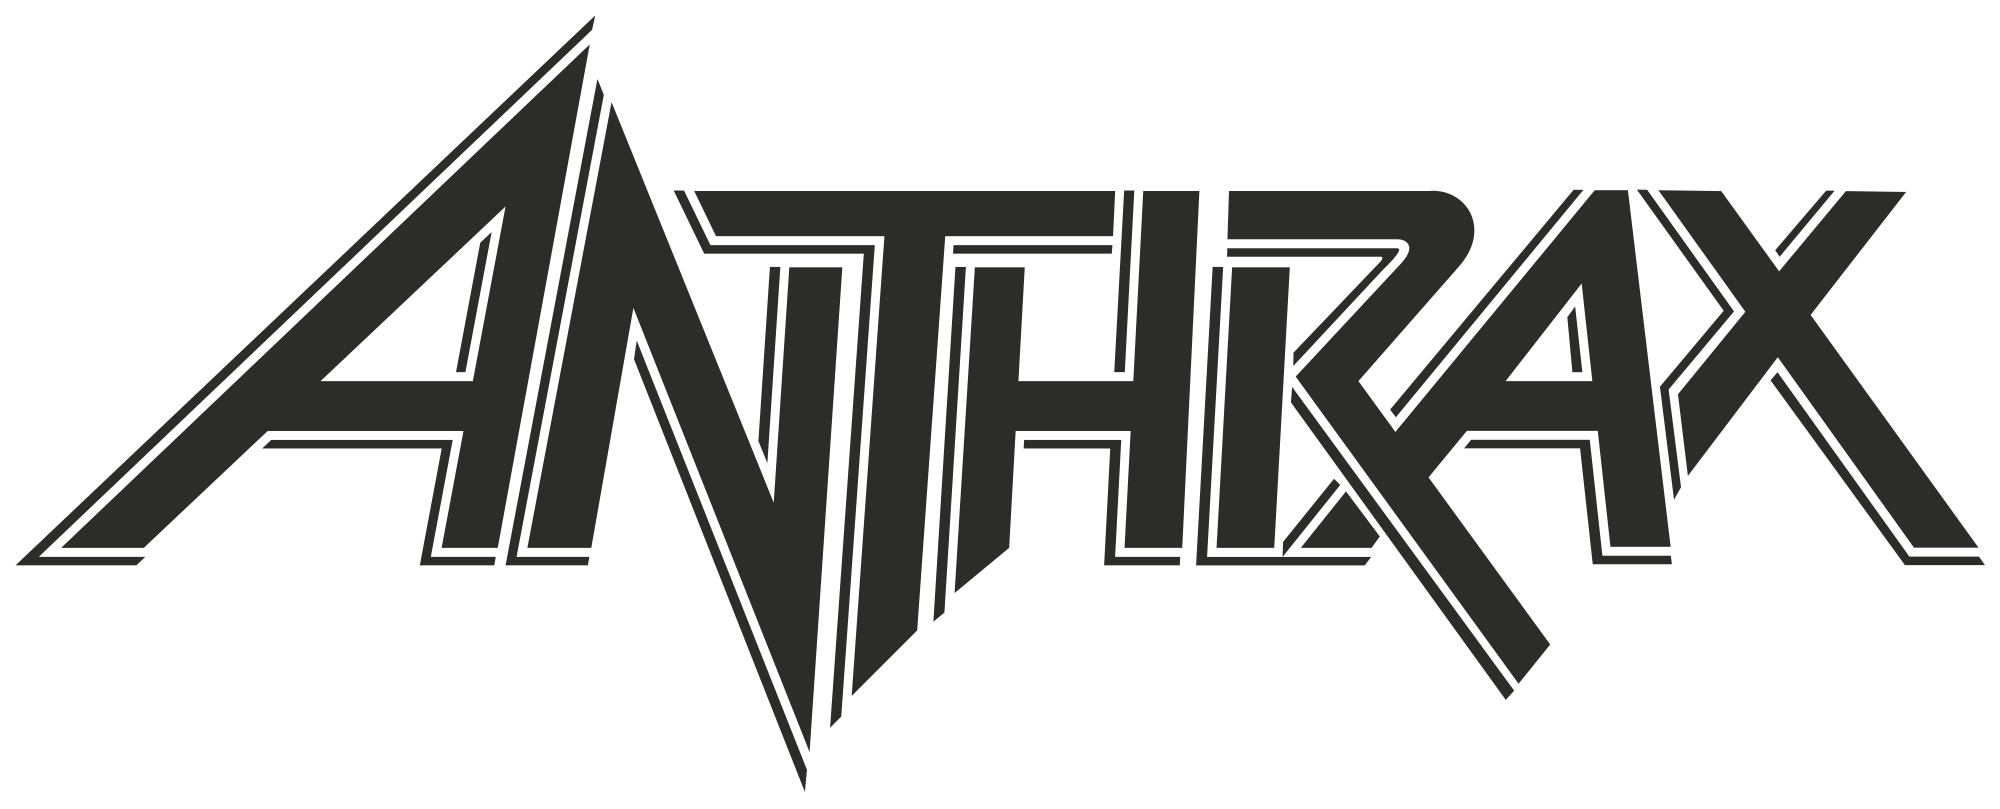 Anthrax Logo - File:Anthrax-logo.svg - Wikimedia Commons